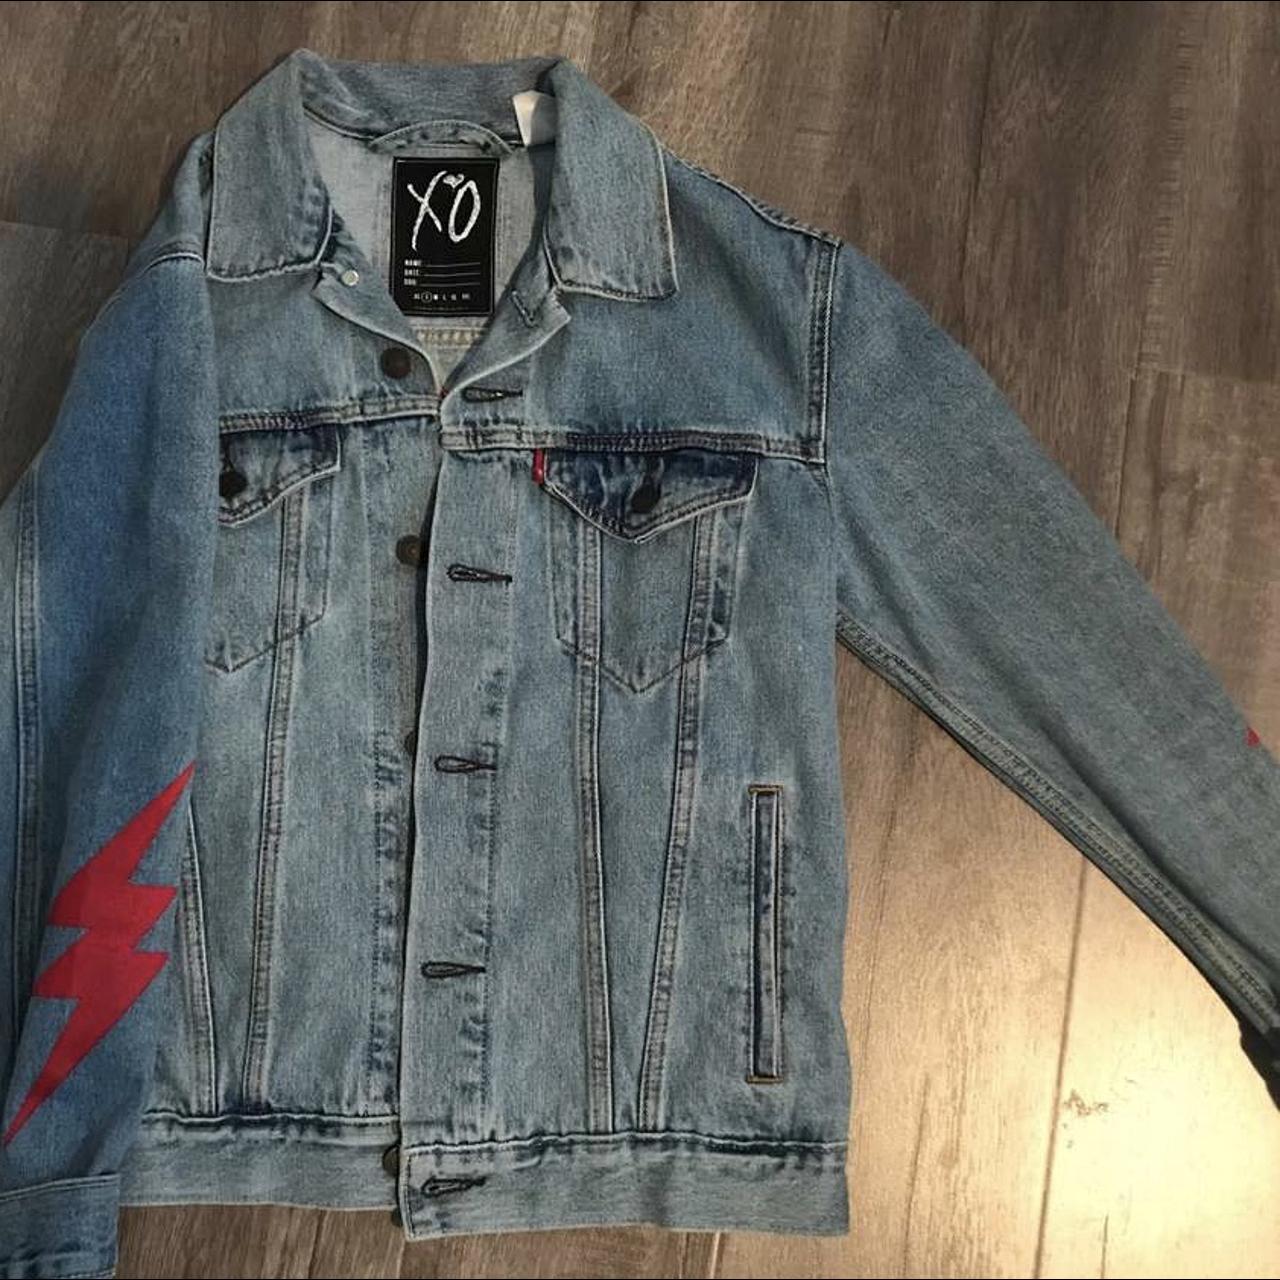 Levi's The Weeknd Starboy Jean Jacket for Sale in Santa Ana, CA - OfferUp